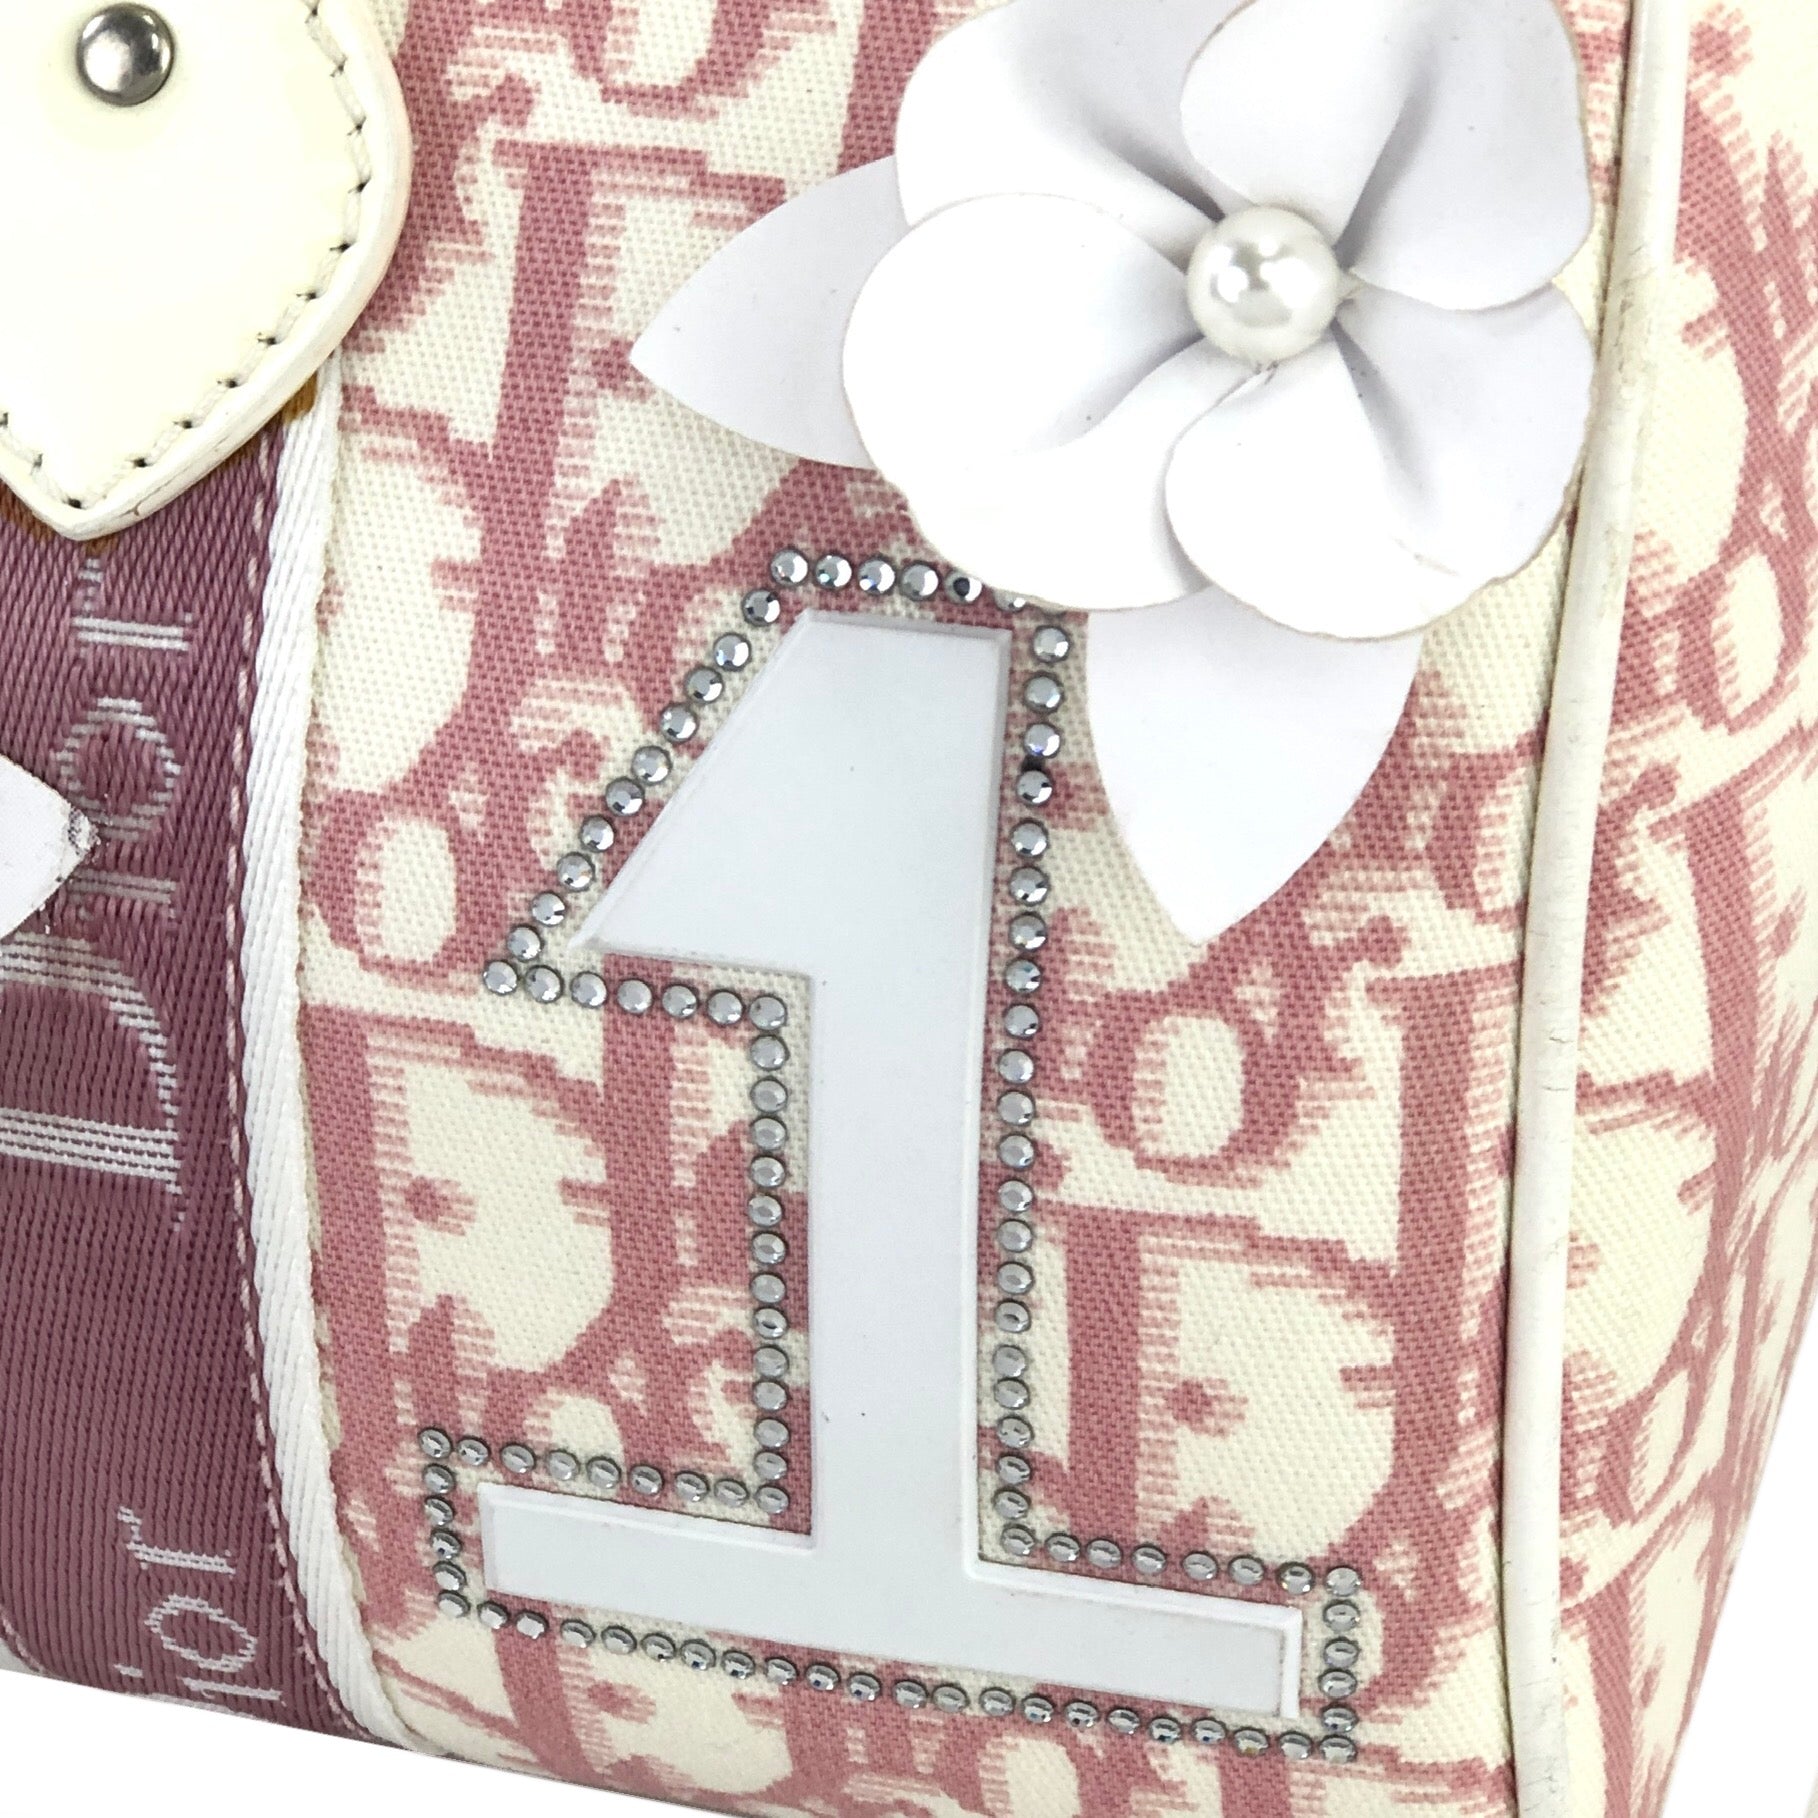 Christian Dior Vintage Girly Trotter Floral Boston Bag w/ Authenticity –  Oliver Jewellery